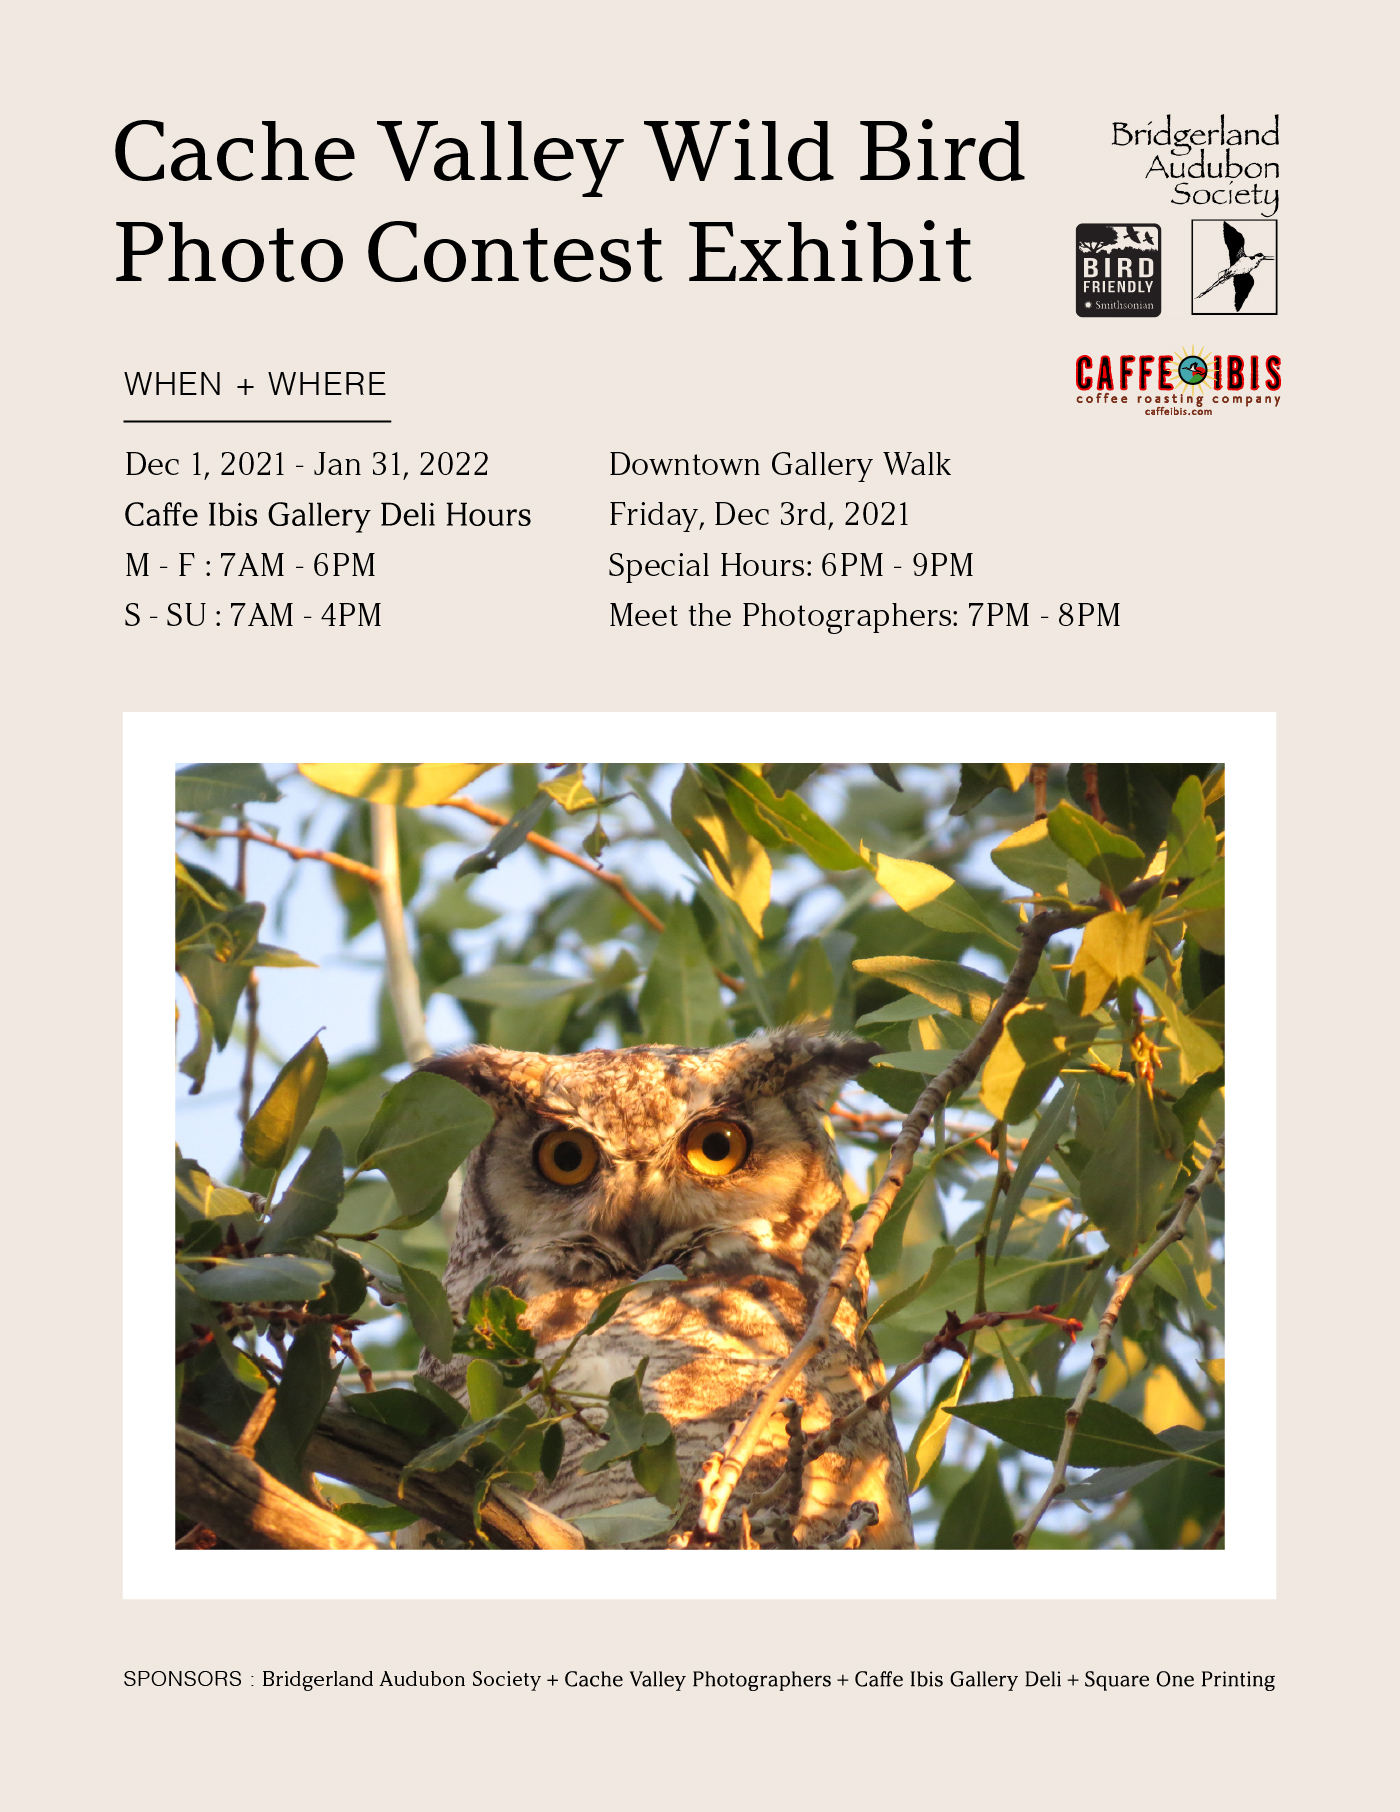 Cache Valley Wild Bird Photo Contest: View the winners of the Cache Valley Wild Bird Photo Contest. Click to view all entries.